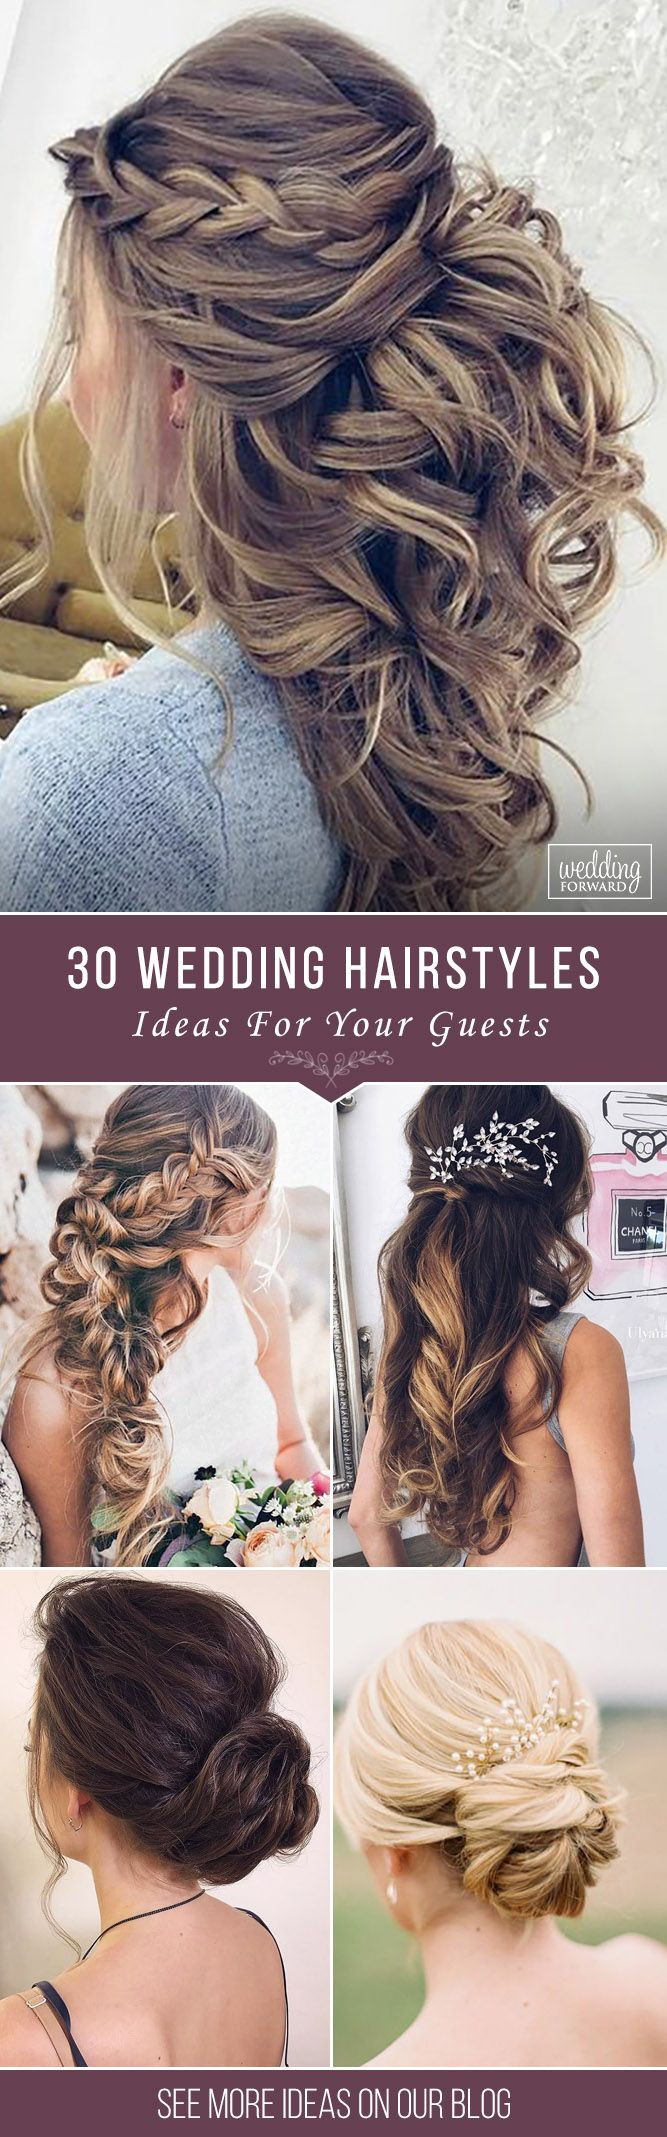 Wedding Guest Hairstyles DIY
 36 Chic And Easy Wedding Guest Hairstyles